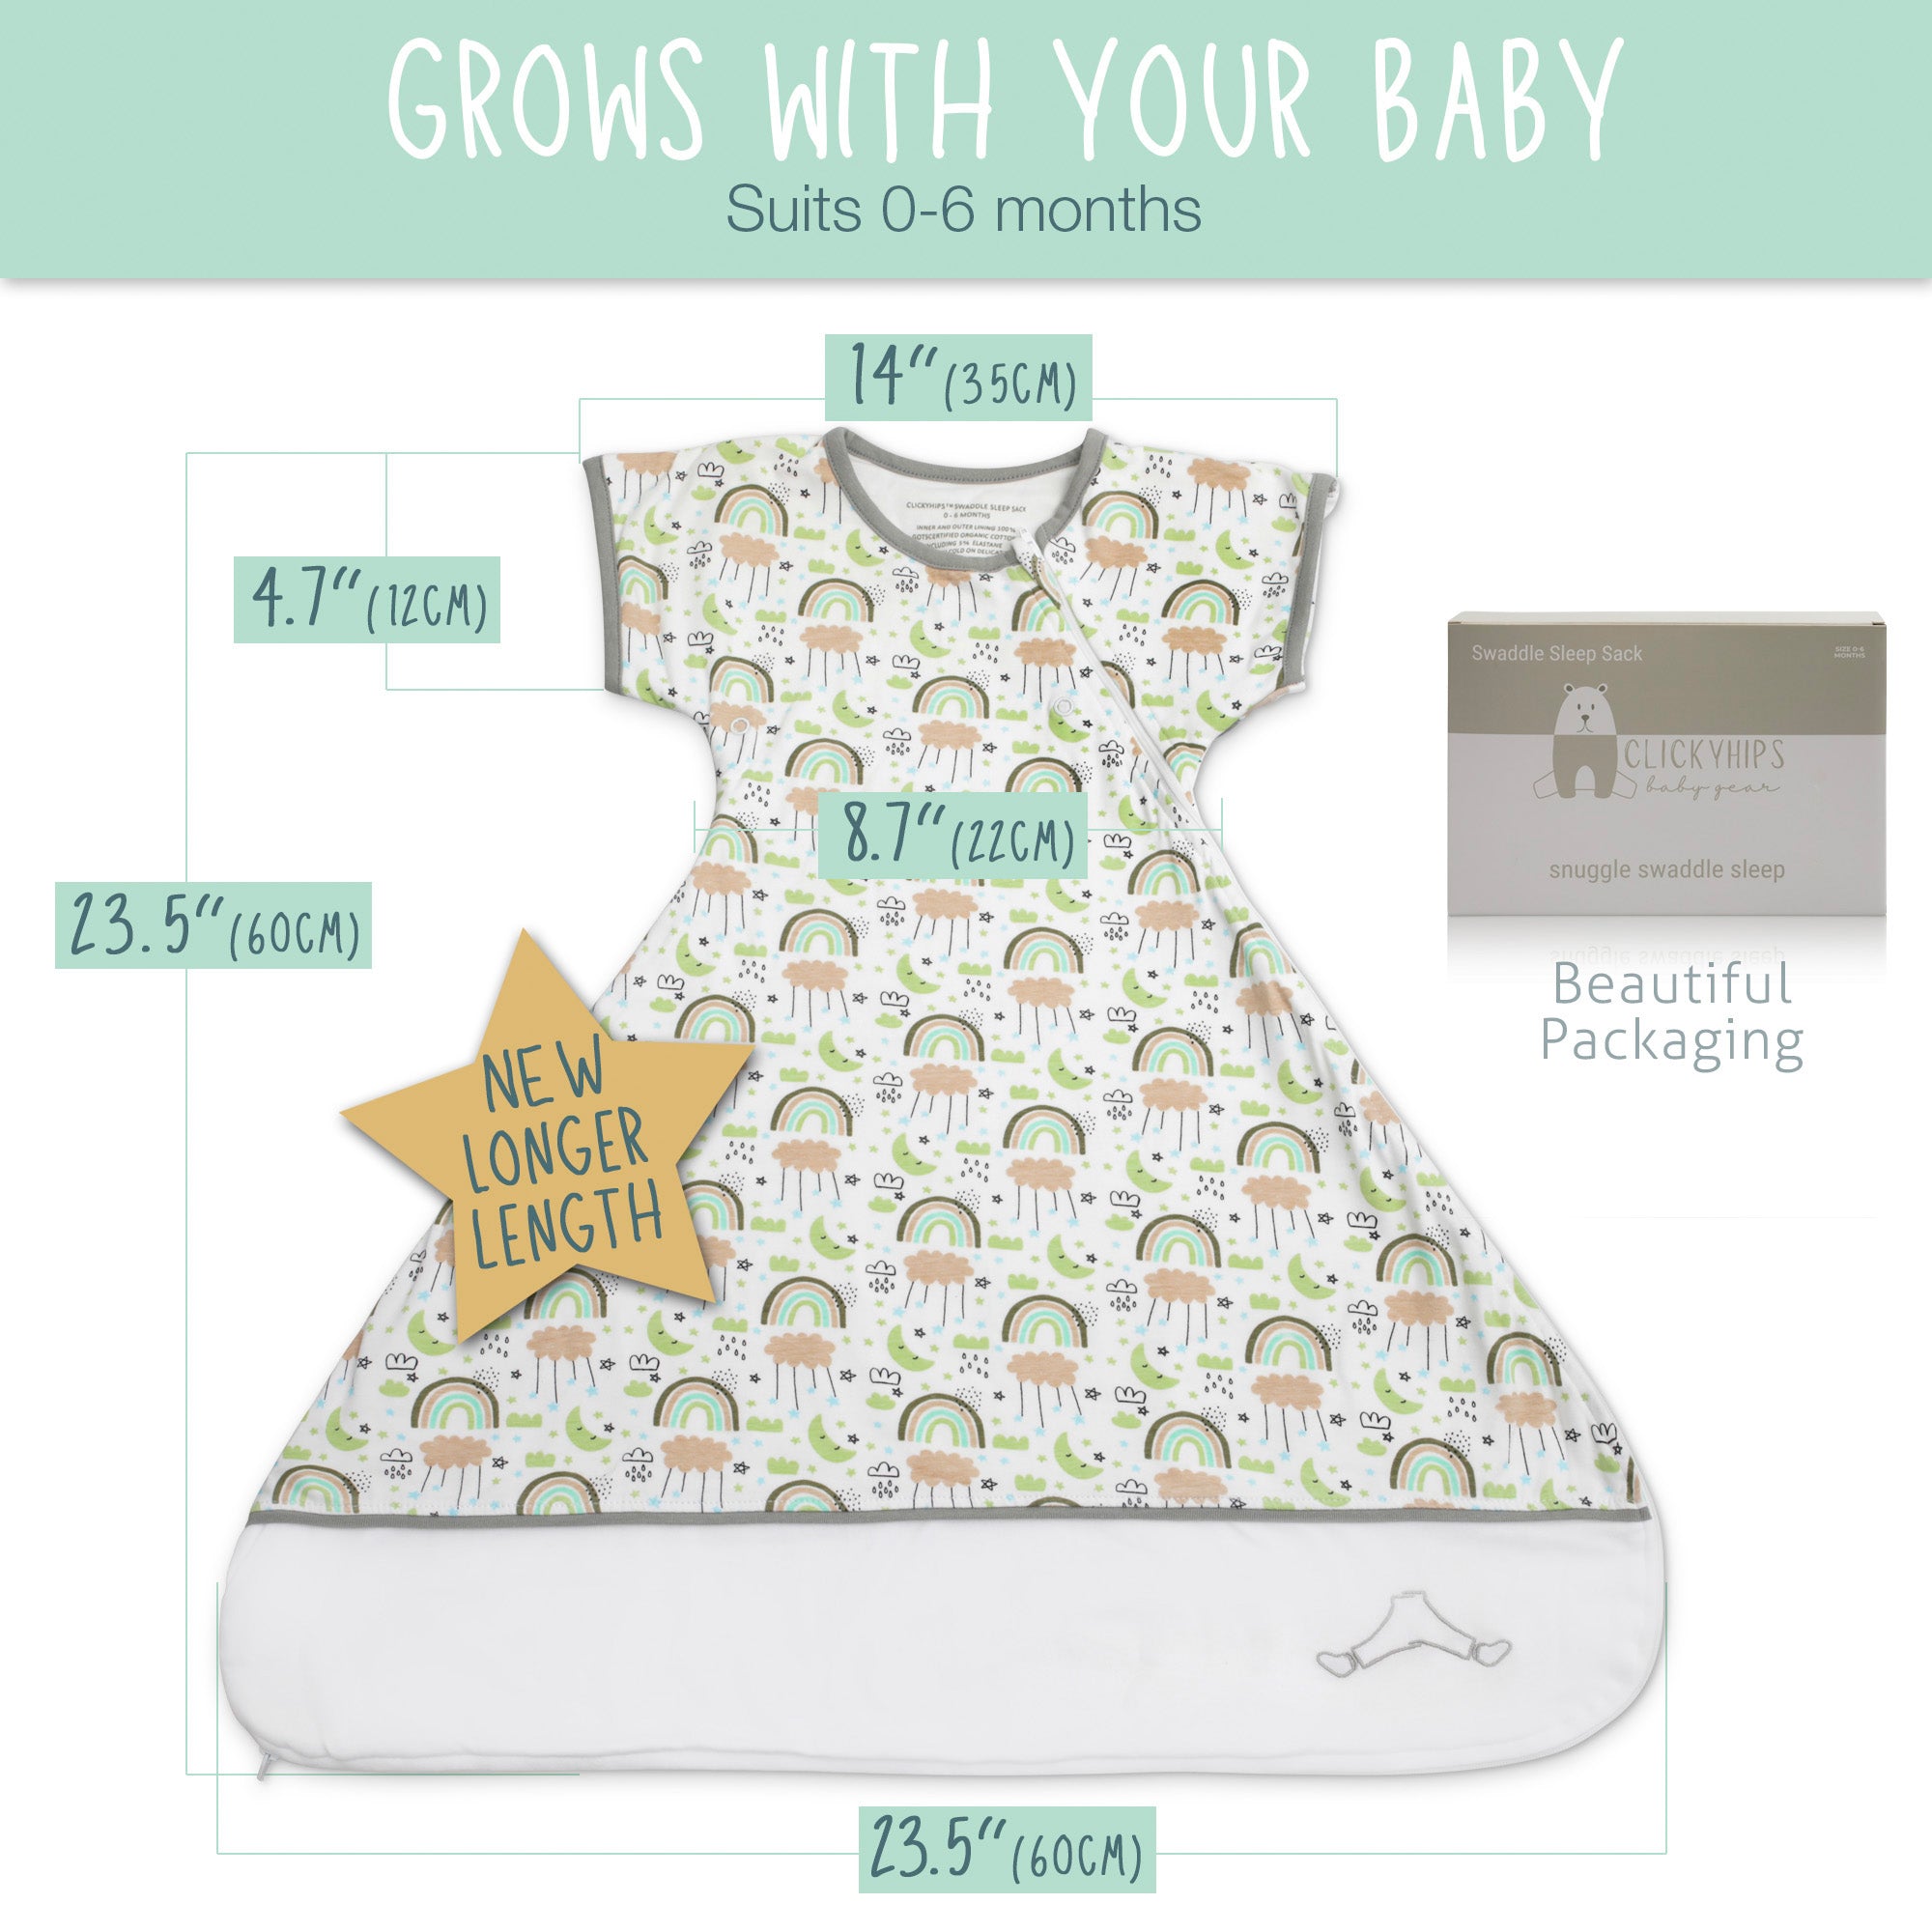 Swaddle Sack Arms Up, Allows Babies Hips to Move Freely, fits Newborn Babies 0-6 Months, Arms in/Out Transition Swaddle Sack, Baby Sleep Sack, Organic Cotton Rainbow (Mint, Salmon, Green)